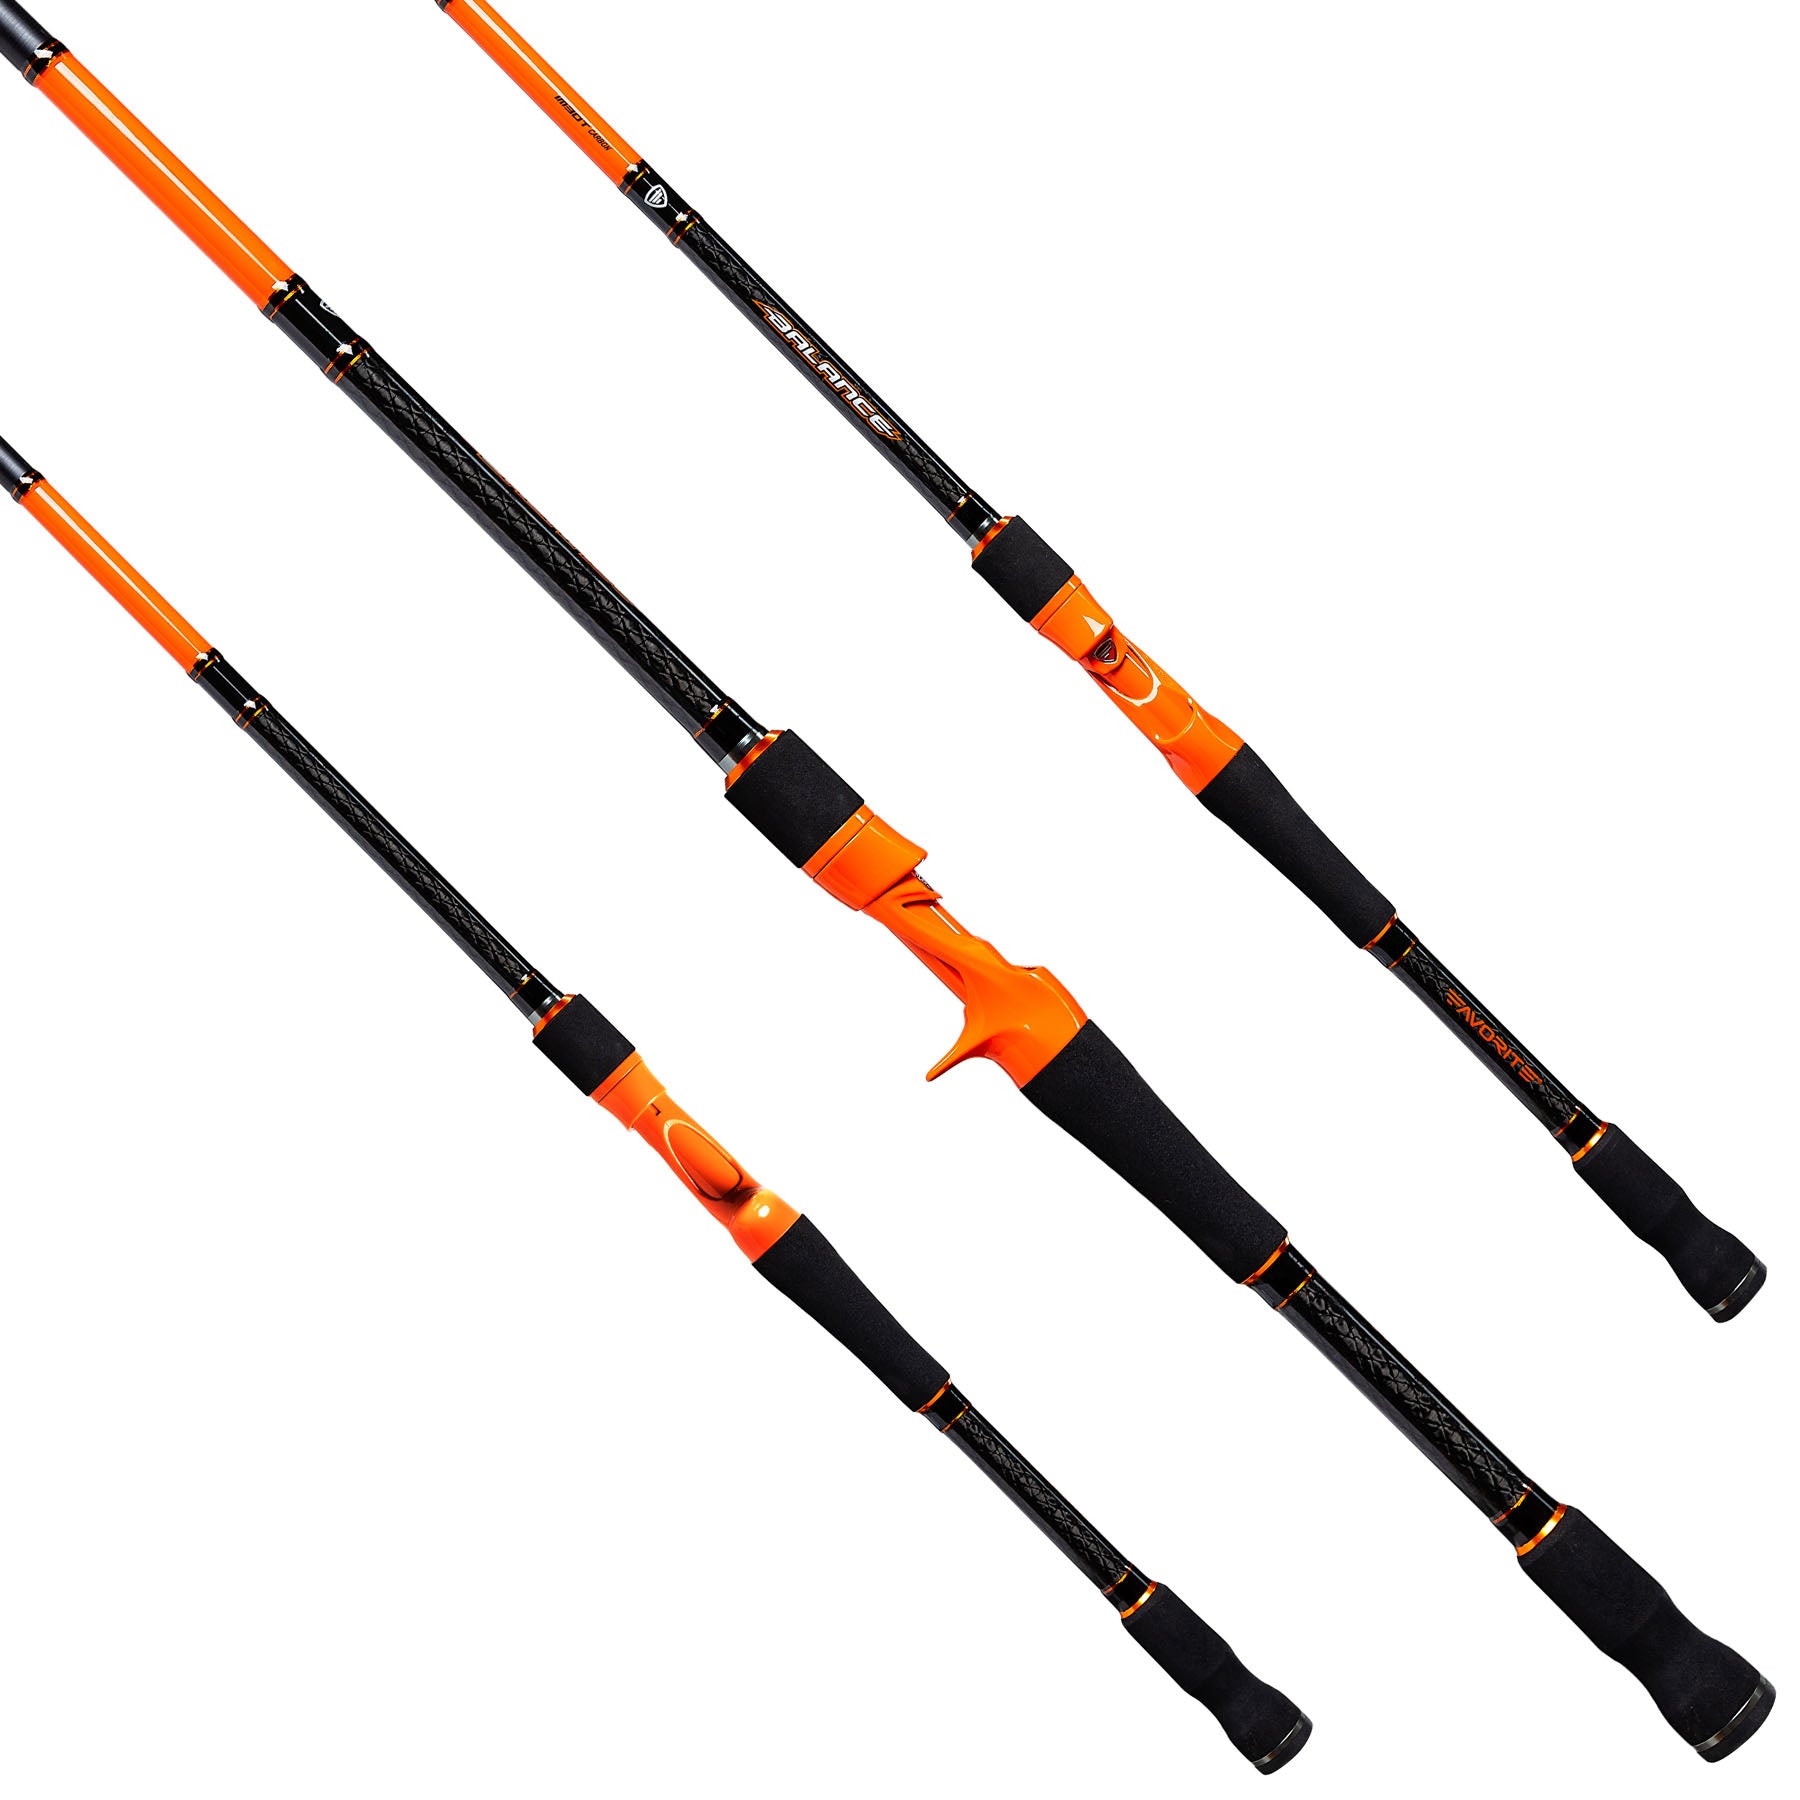 Black Cat Fishing Rod Perfect Passion Allstar at low prices